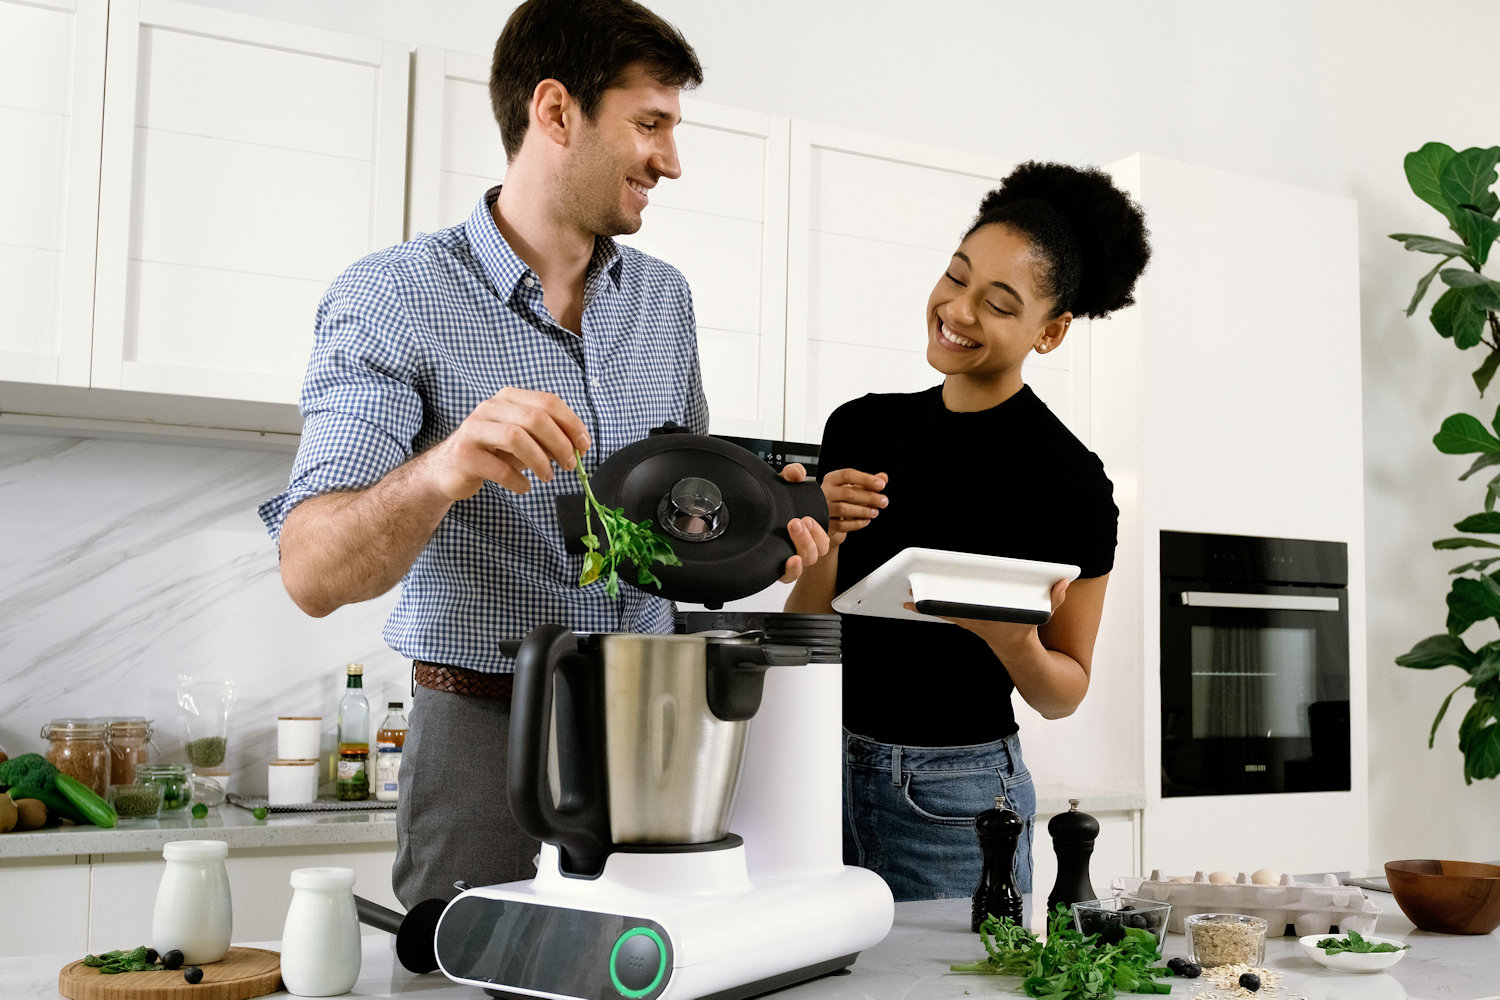 Chicago Inno - This Alexa-Enabled Smart Kitchen Scale Wants to Make You a  Better Cook